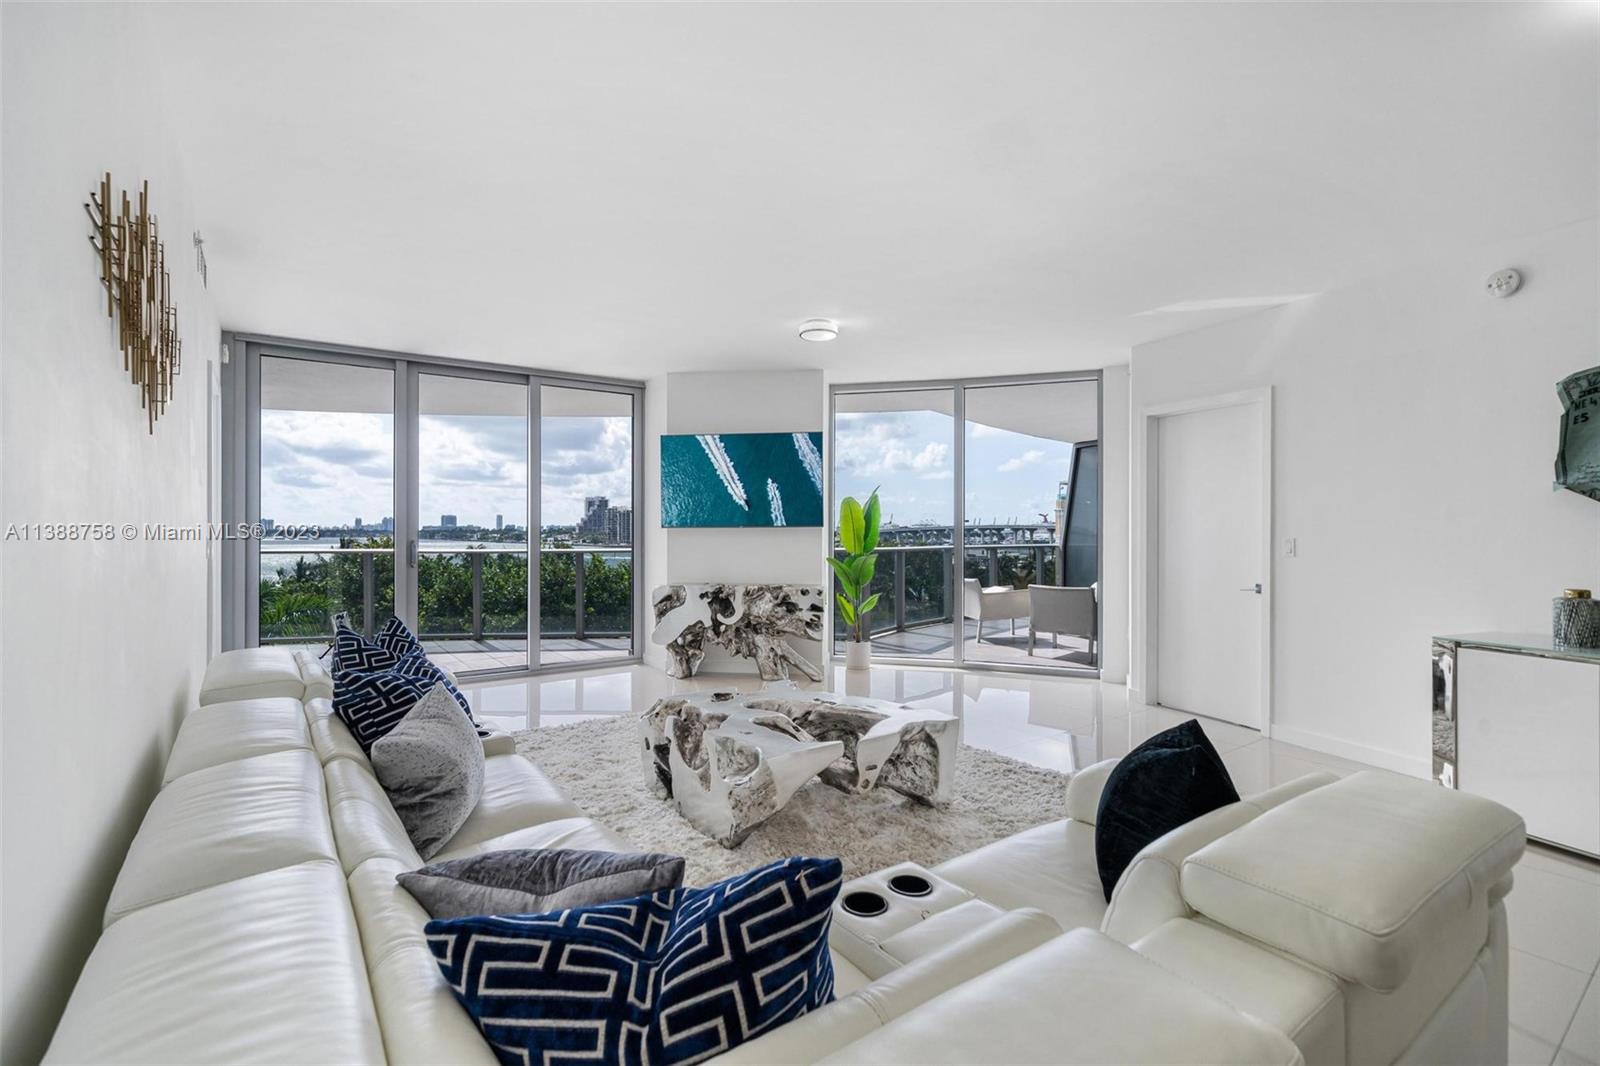 Photo 1 of Aria on the Bay Aria Apt 408 in Miami - MLS A11388758